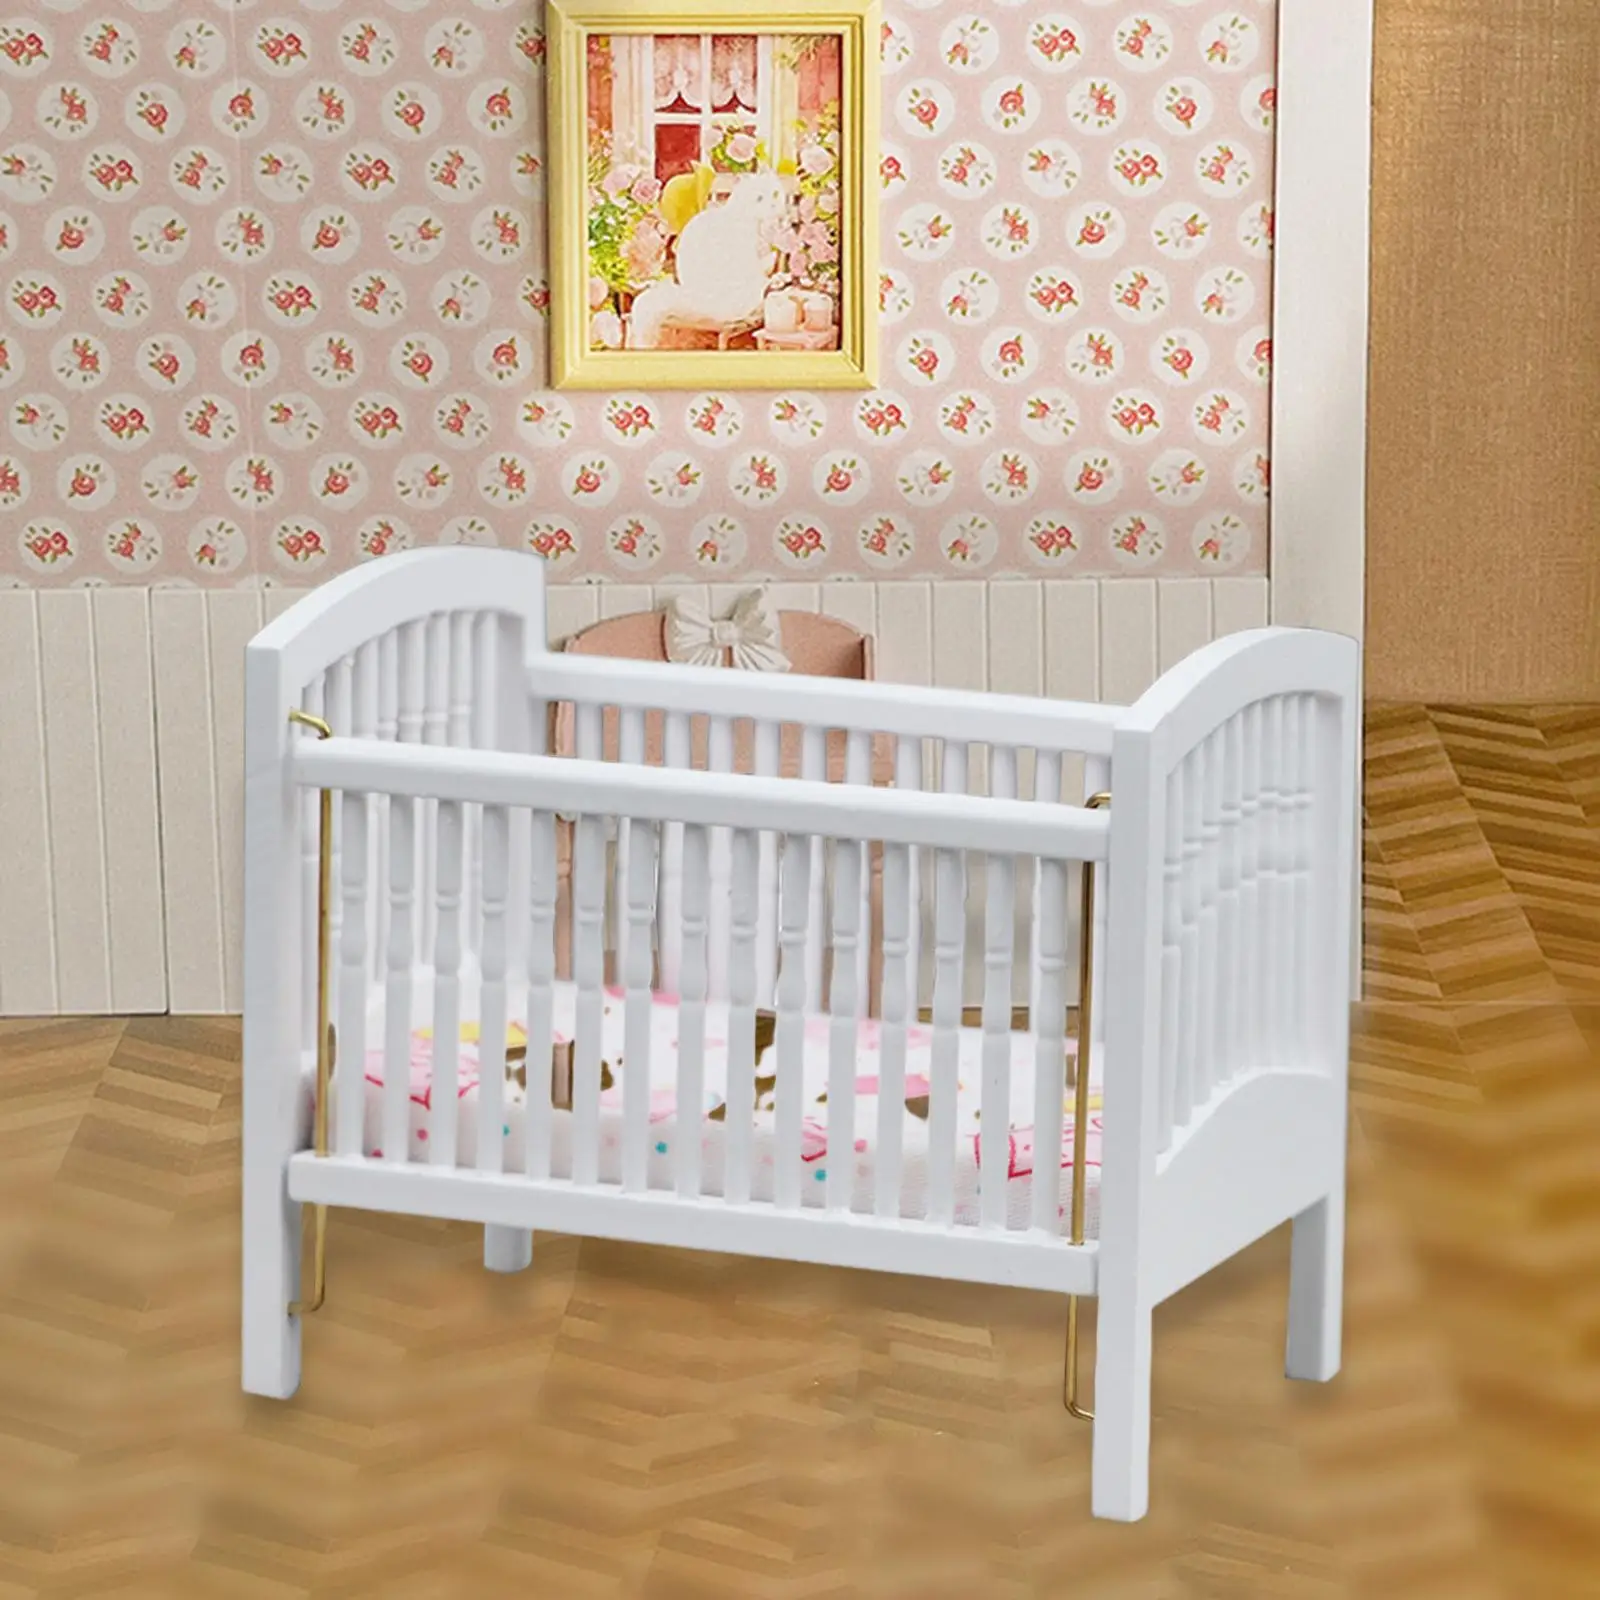 Wooden 1:12 Dollhouse Miniature Crib with Mattress Furniture Toys Model